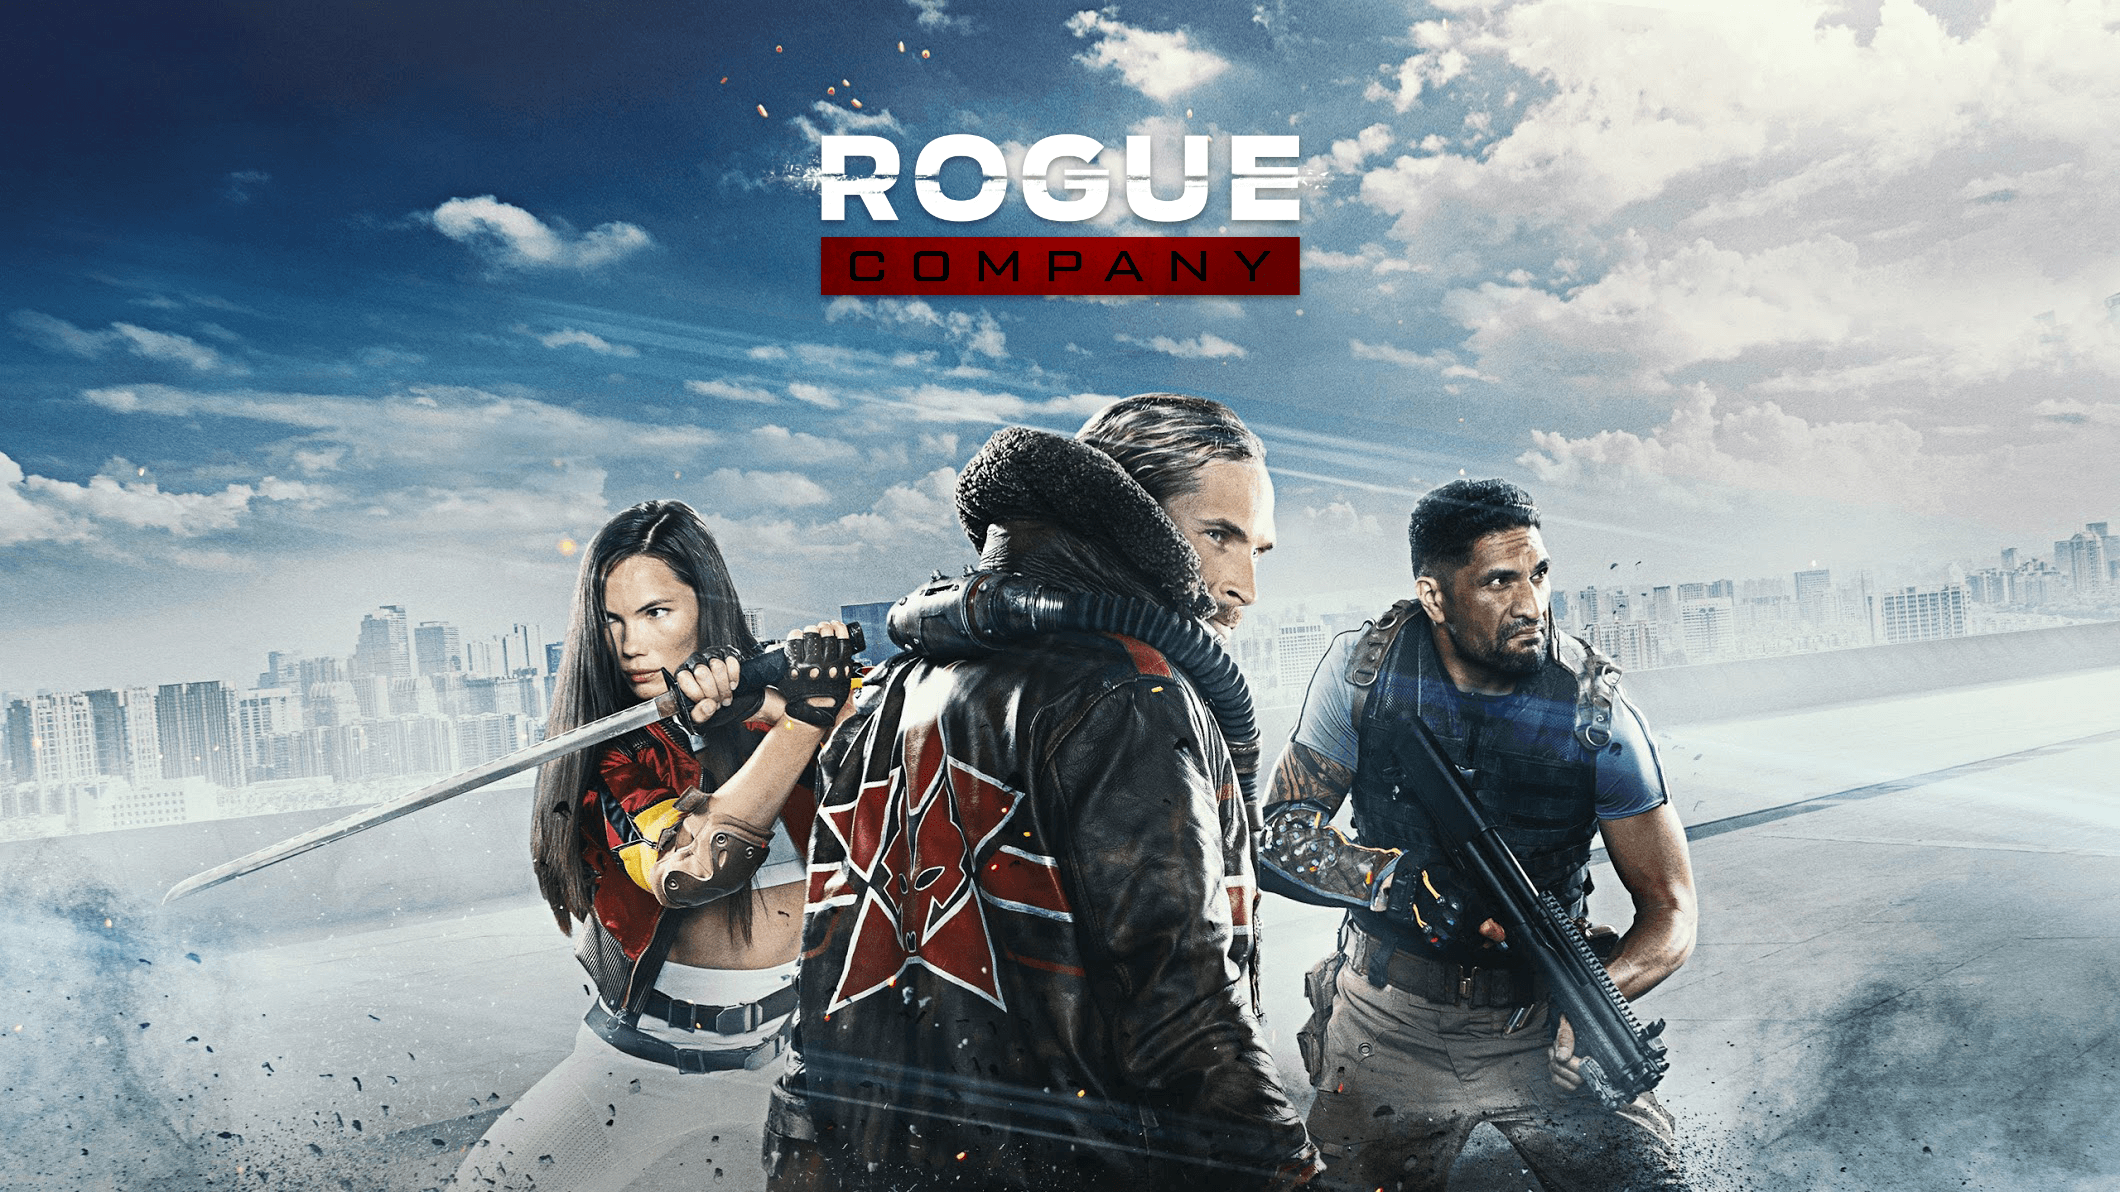 1920x1080 rogue company poster 1080p laptop full hd on rogue company hd wallpapers